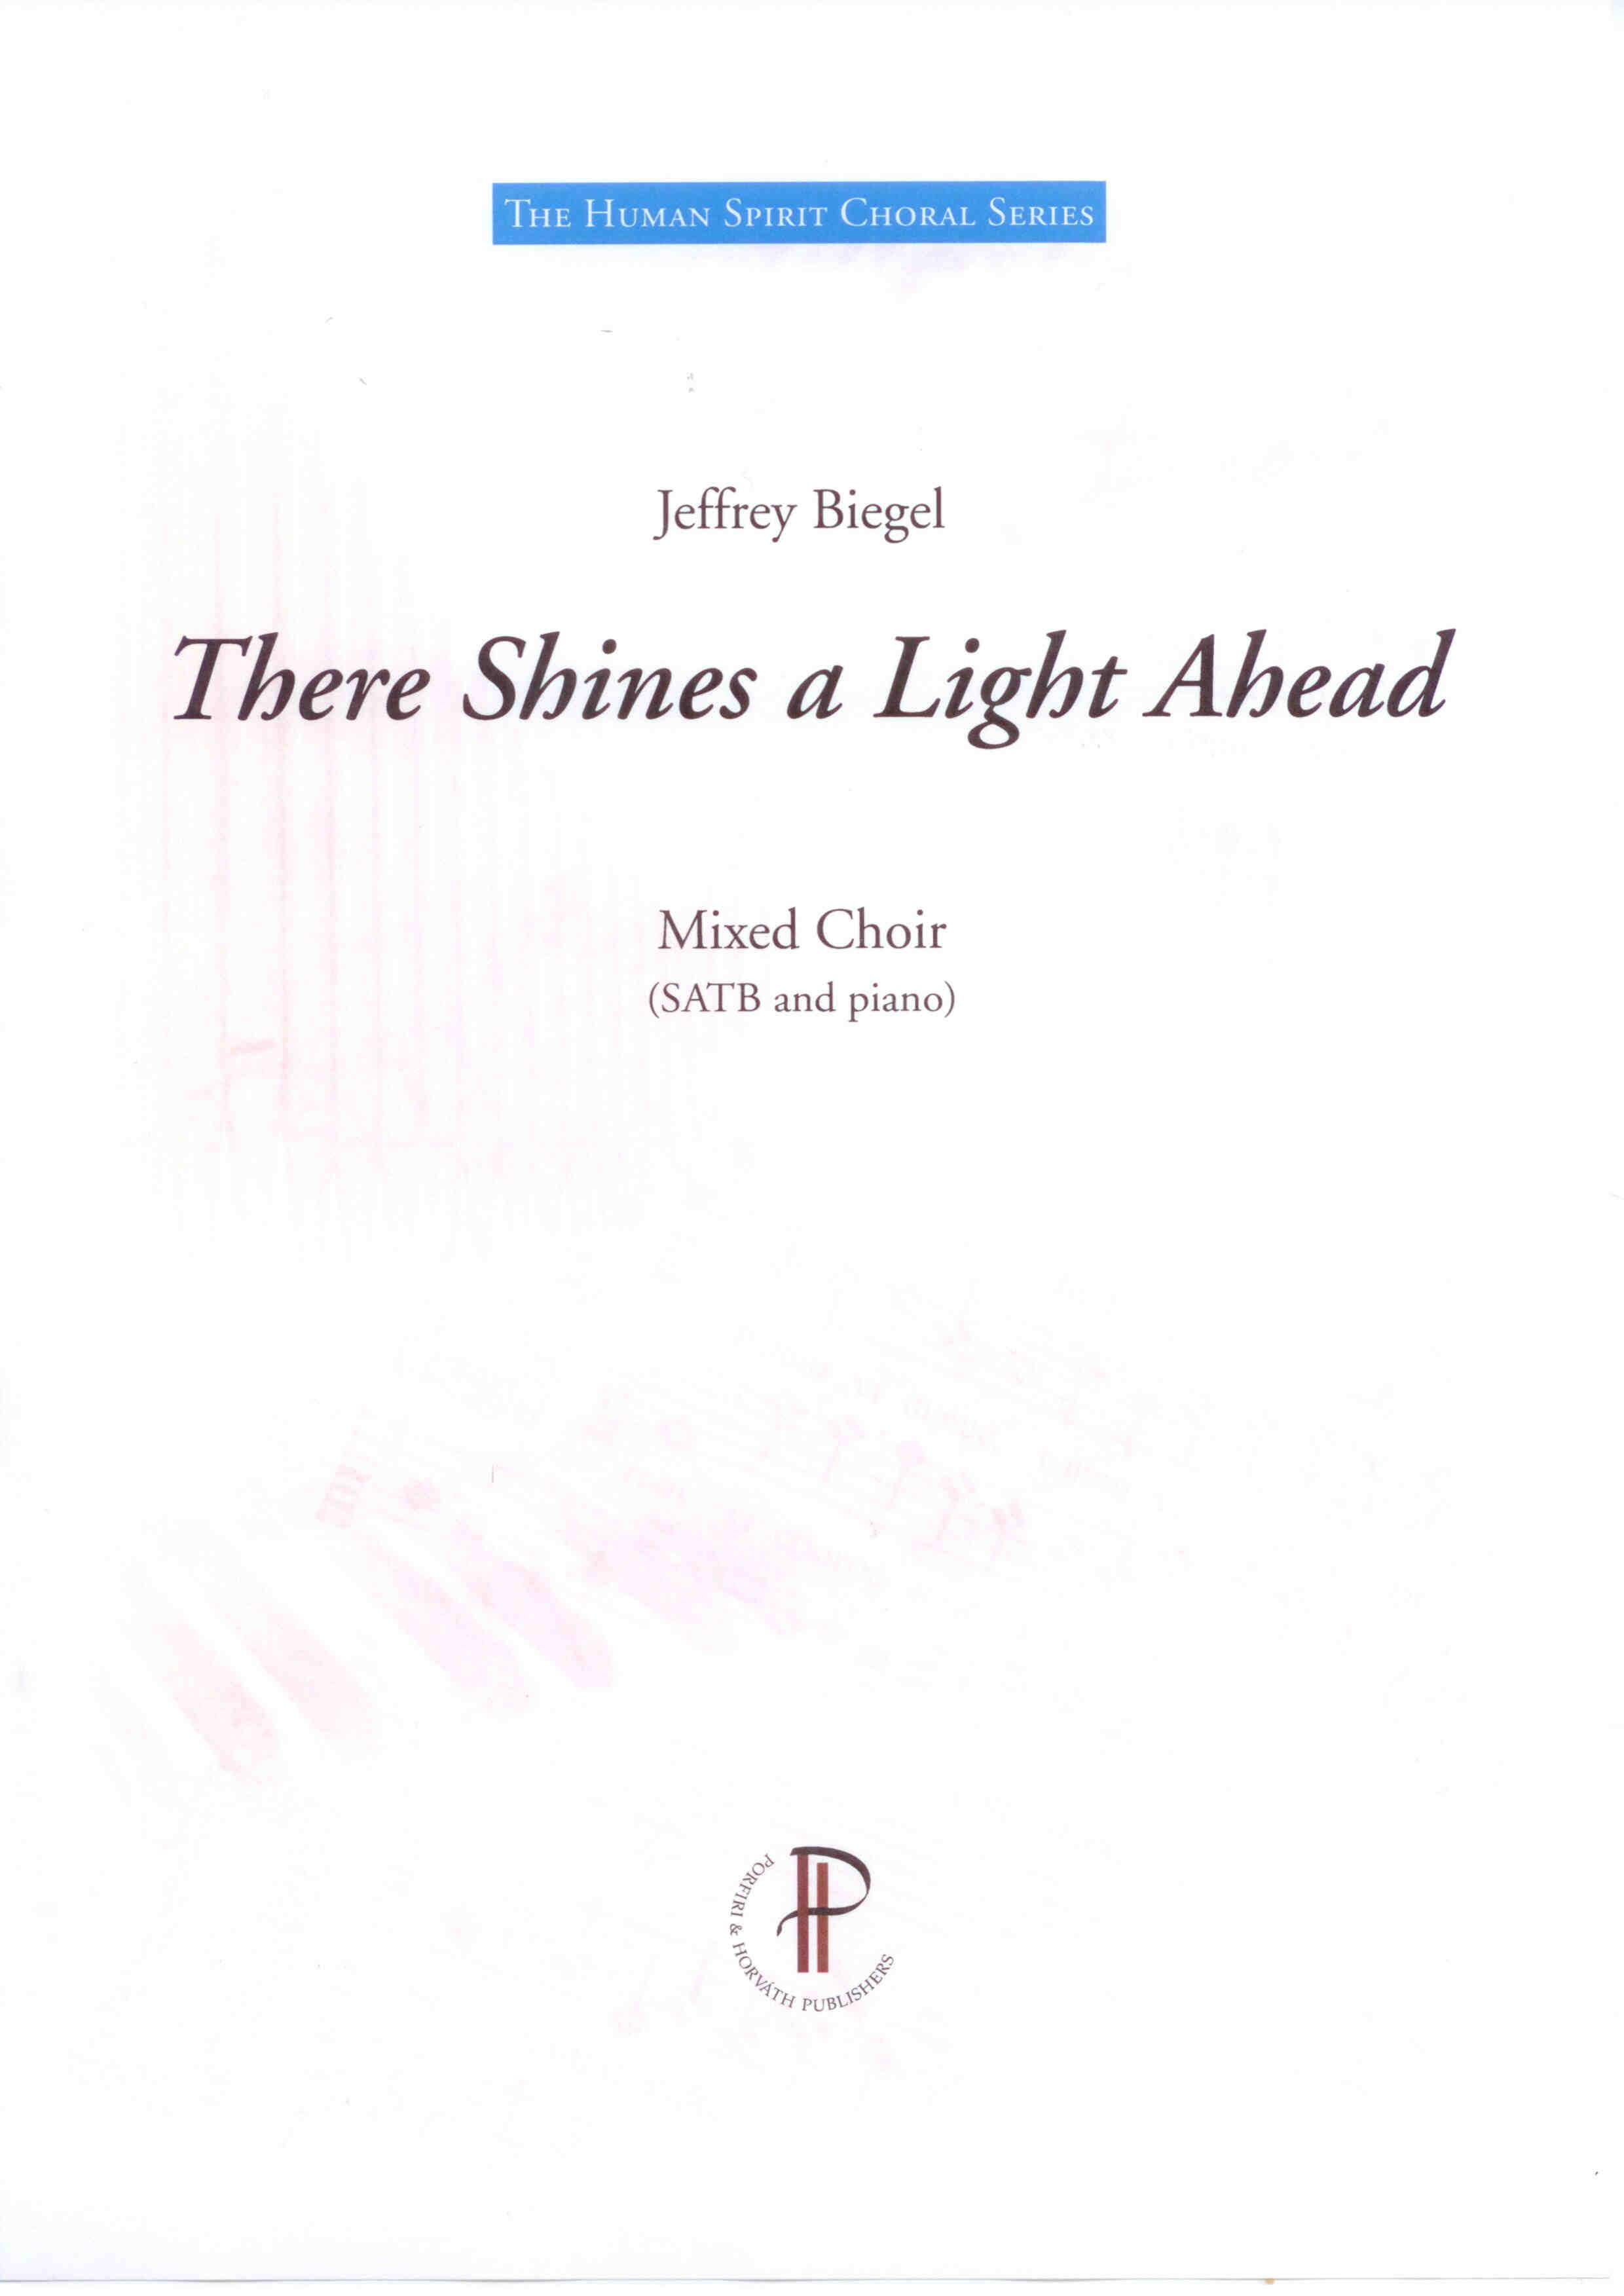 There Shines a Light Ahead - Show sample score